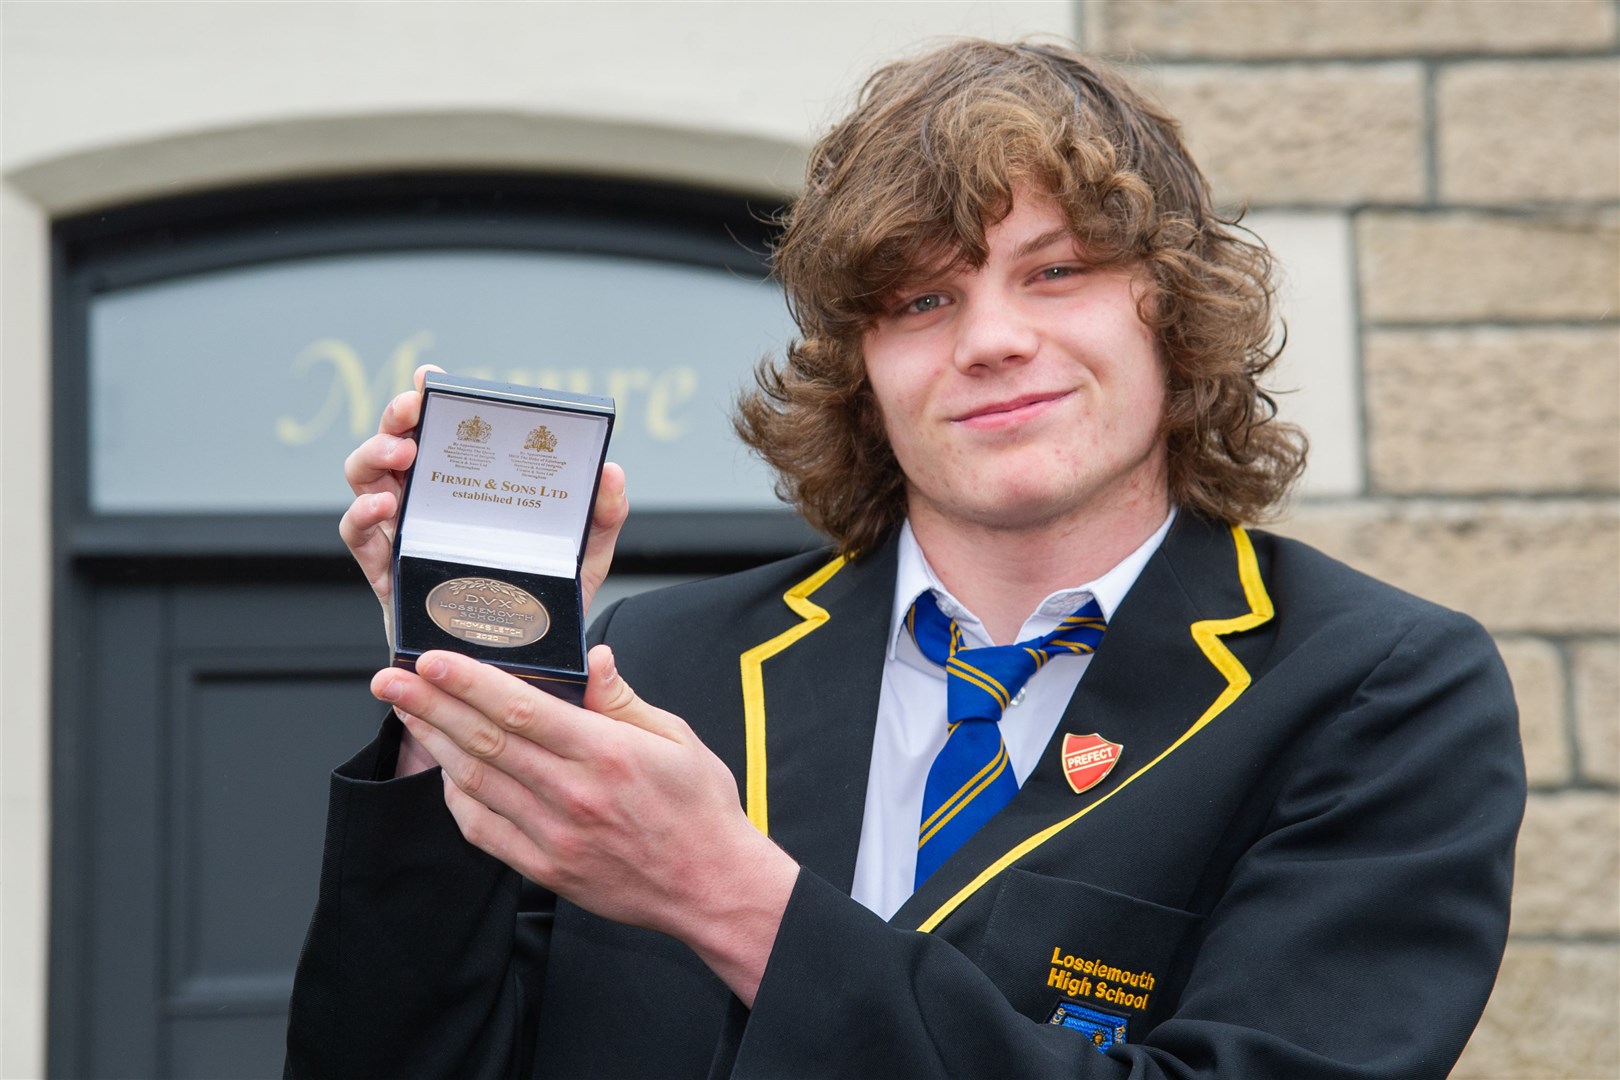 Lossiemouth High School dux Thomas Letch receives his accolade at home in Lossiemouth ahead of the school's virtual award ceremony. Picture: Daniel Forsyth.